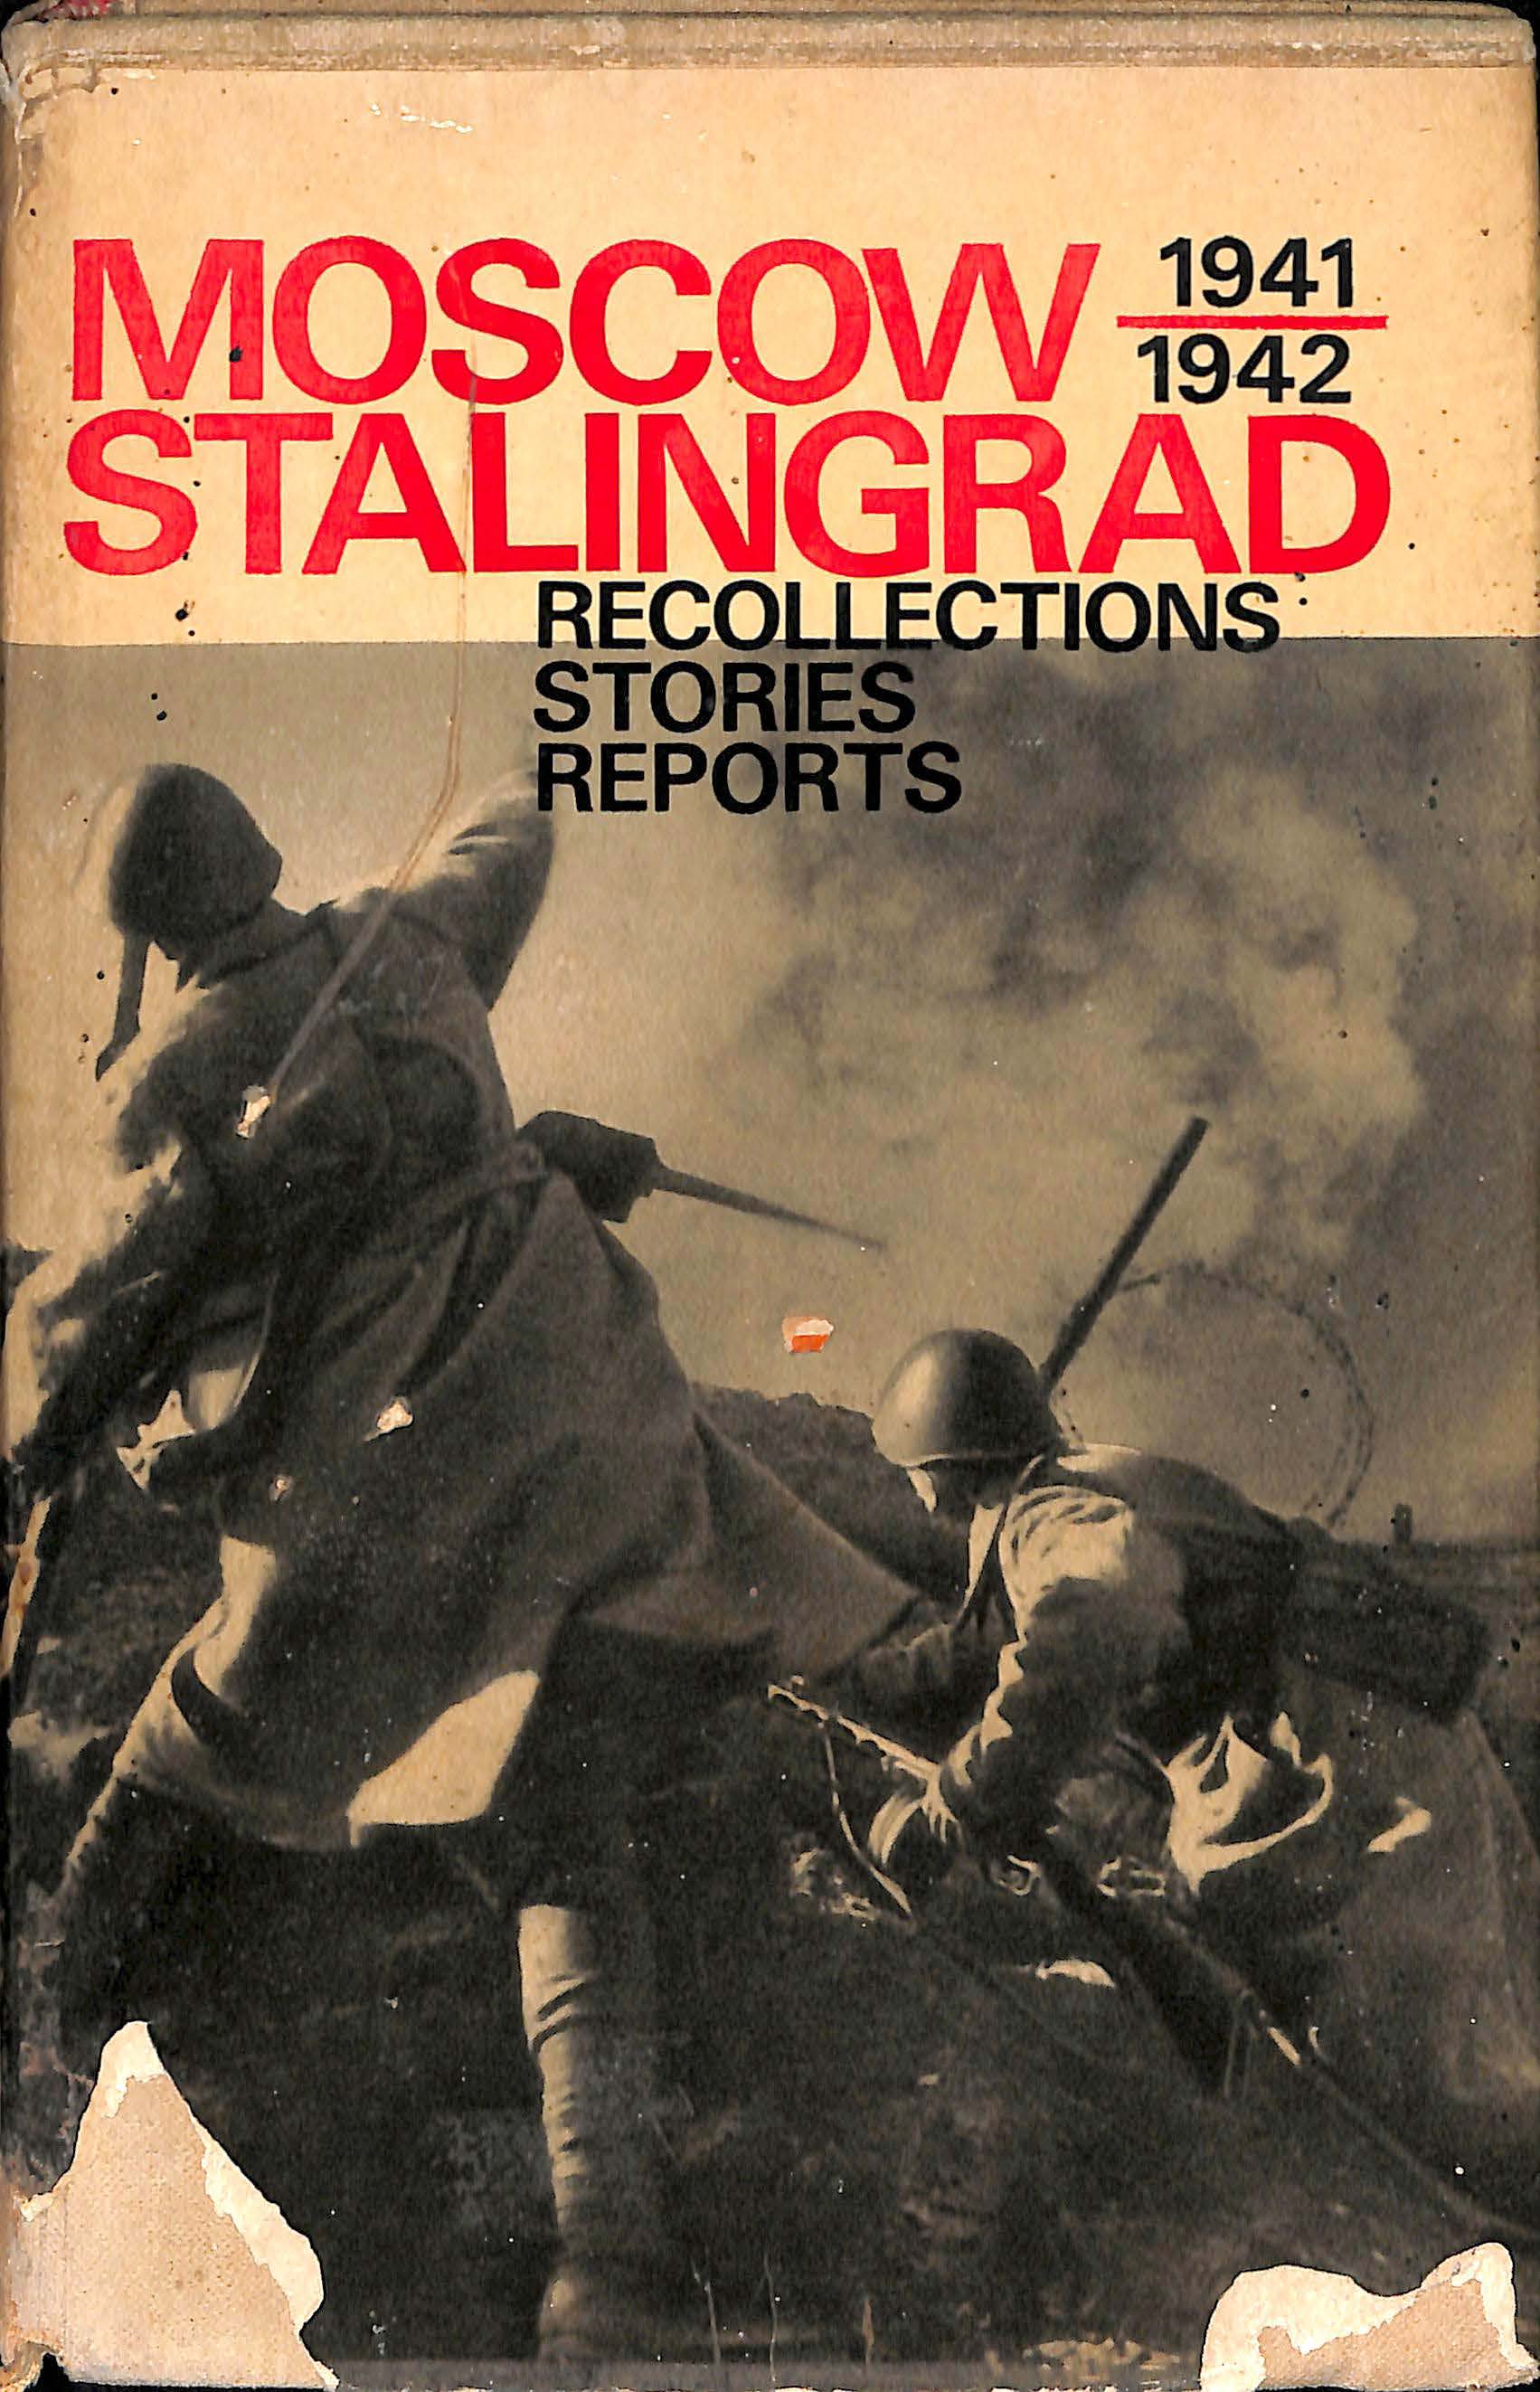 Moscow stalingrad recollections stories reports